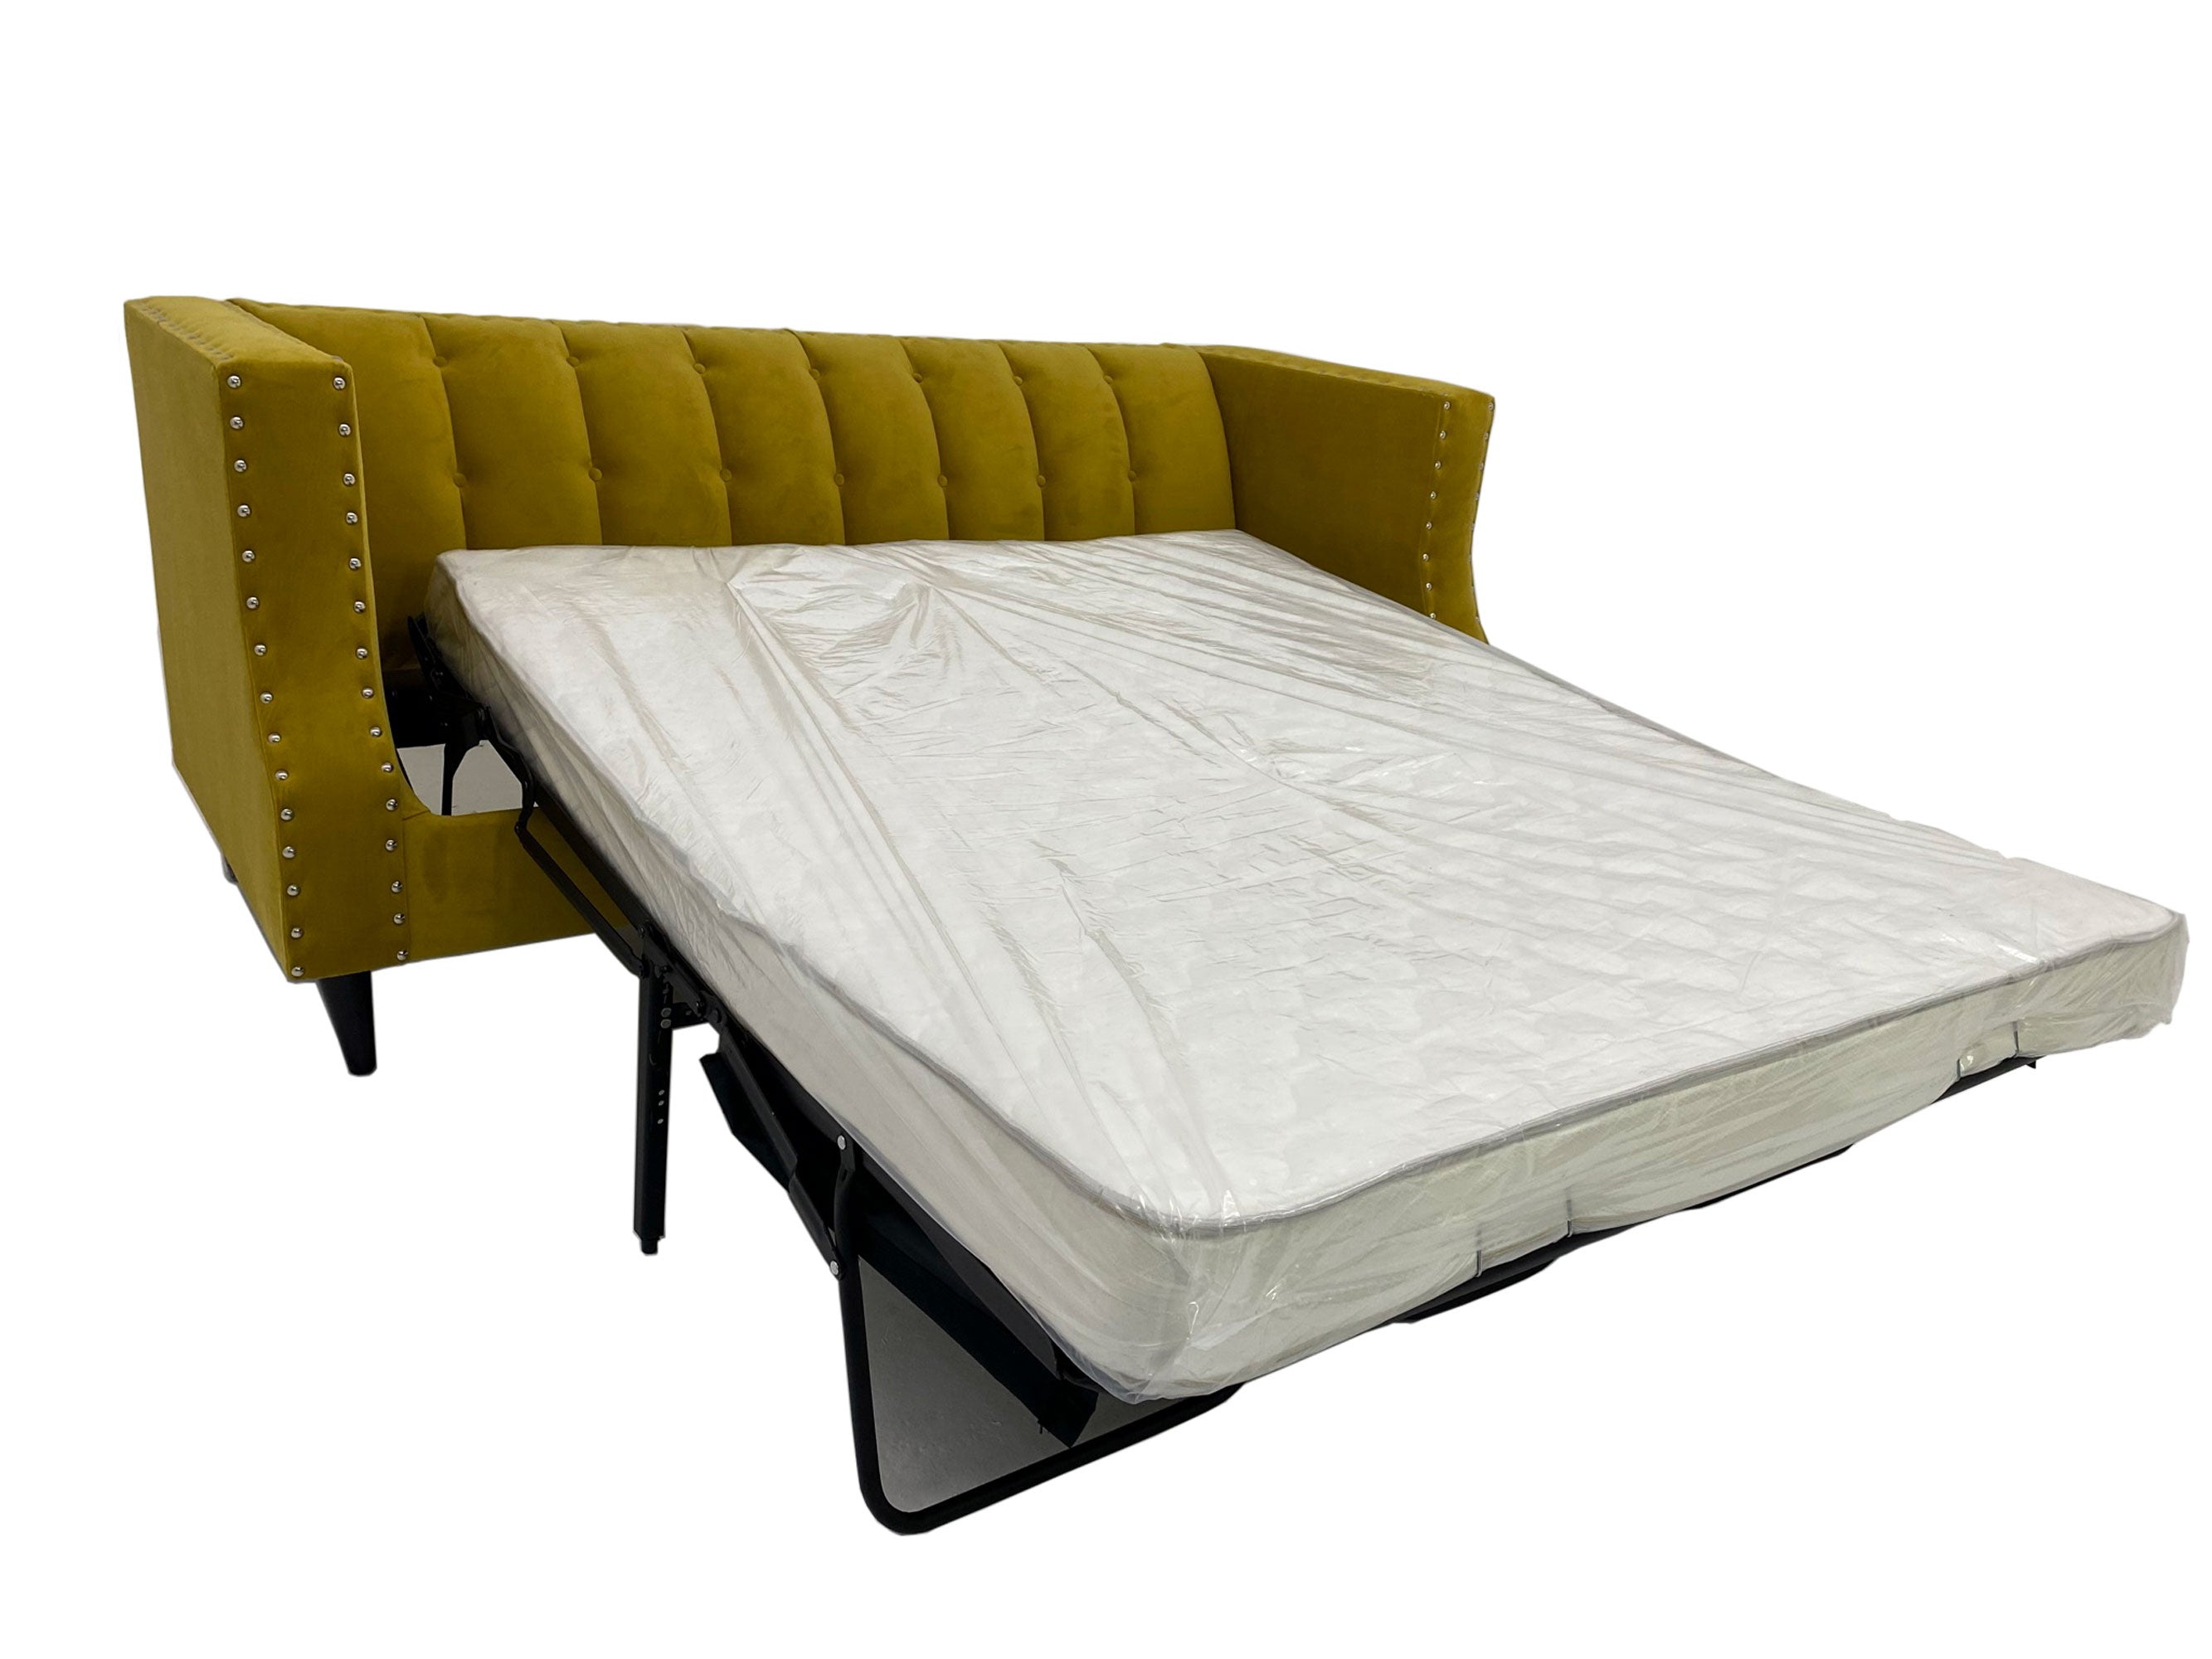 Paris Sofa with Pull out Bed option